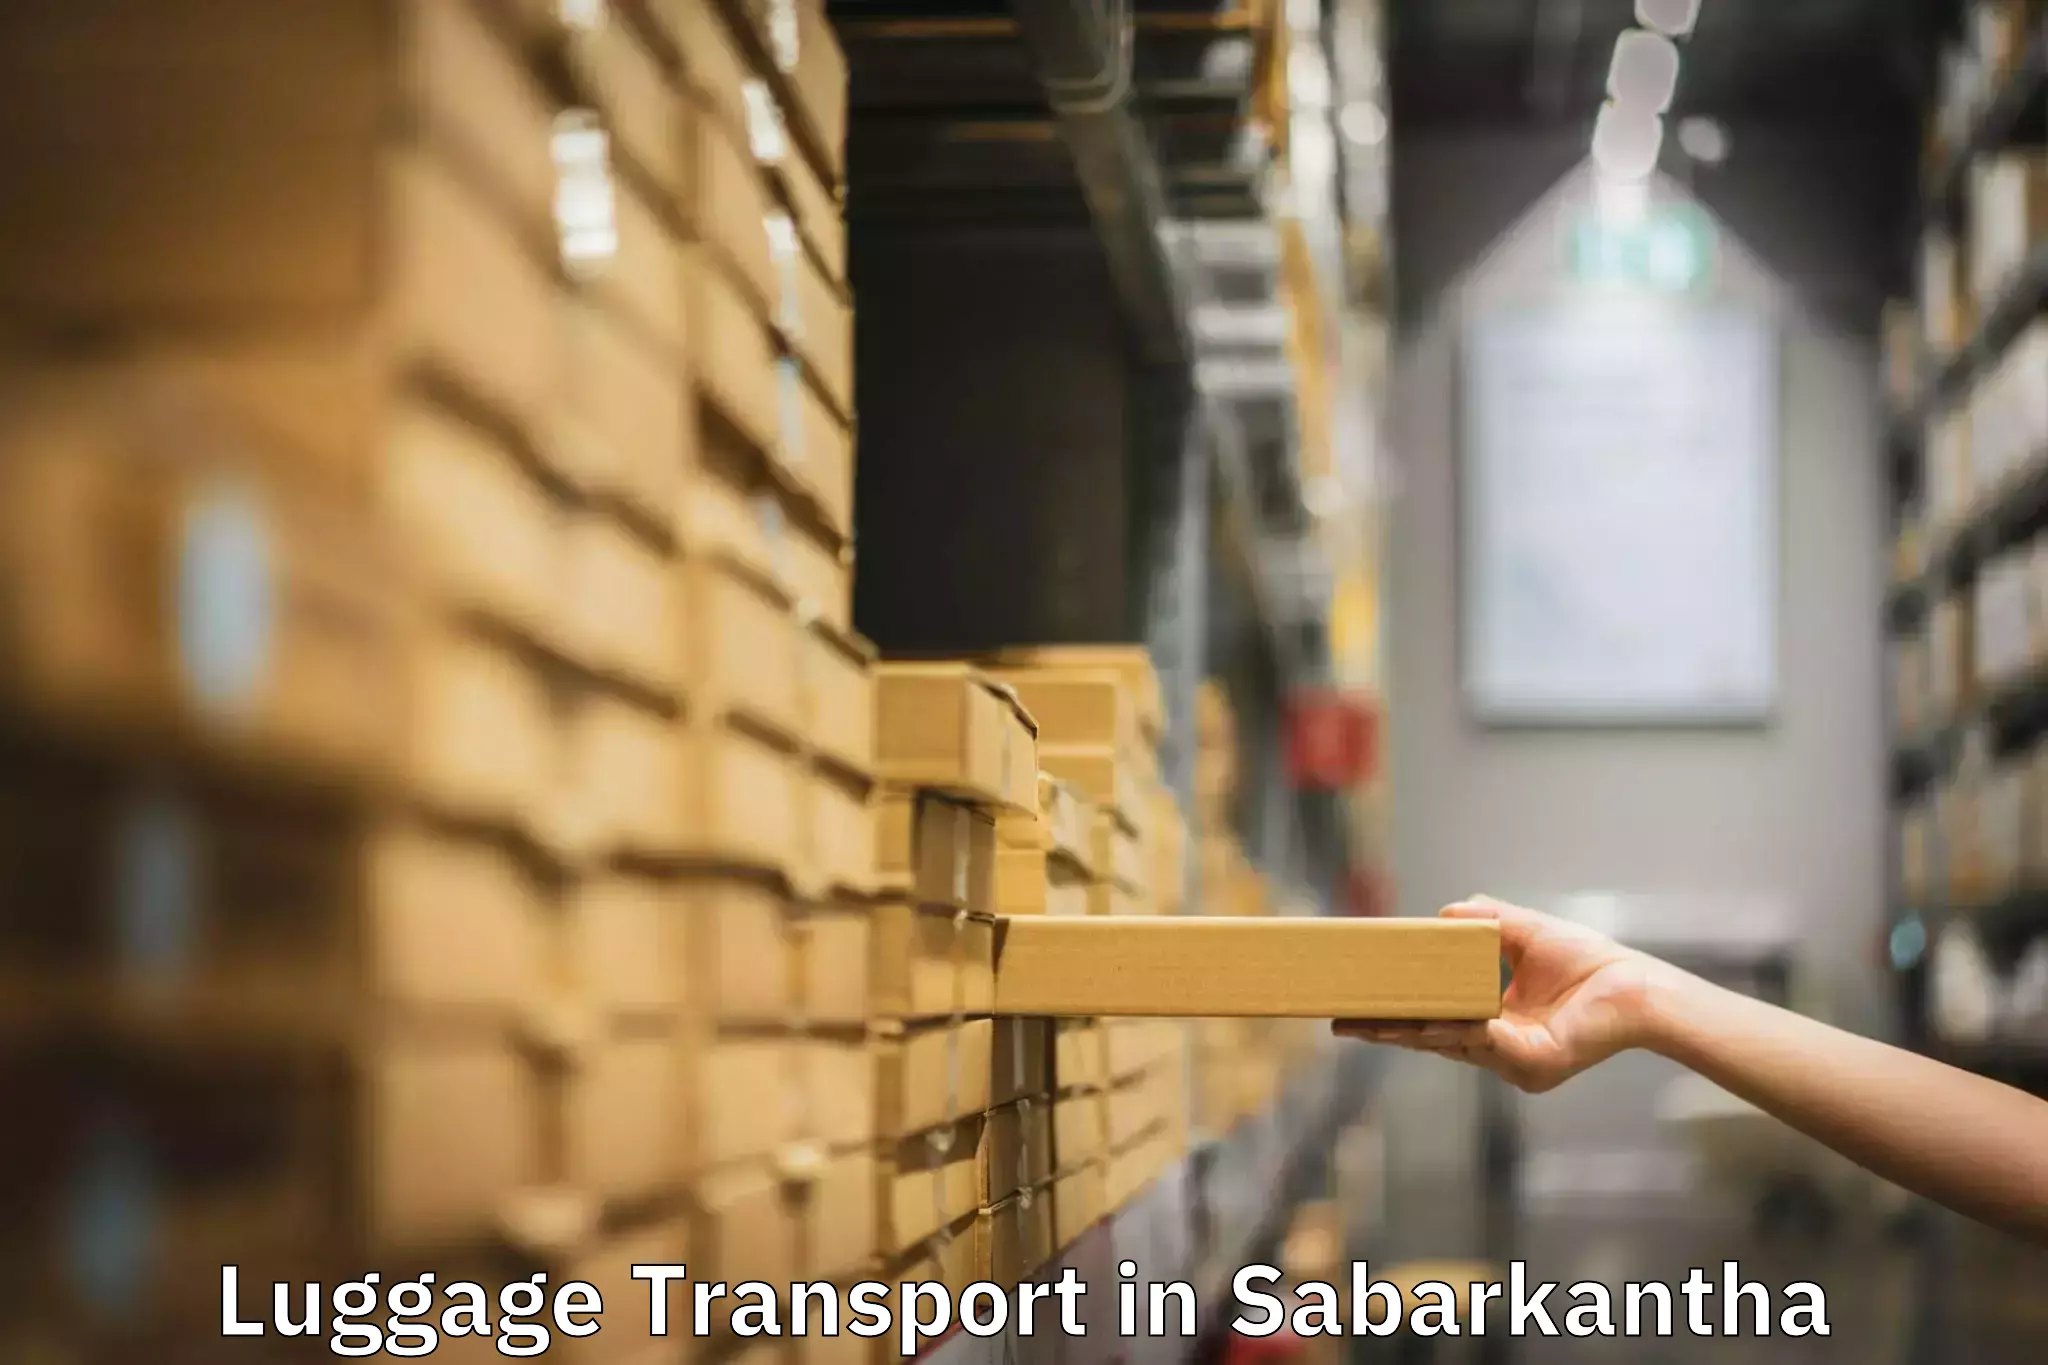 Hassle-free luggage shipping in Sabarkantha